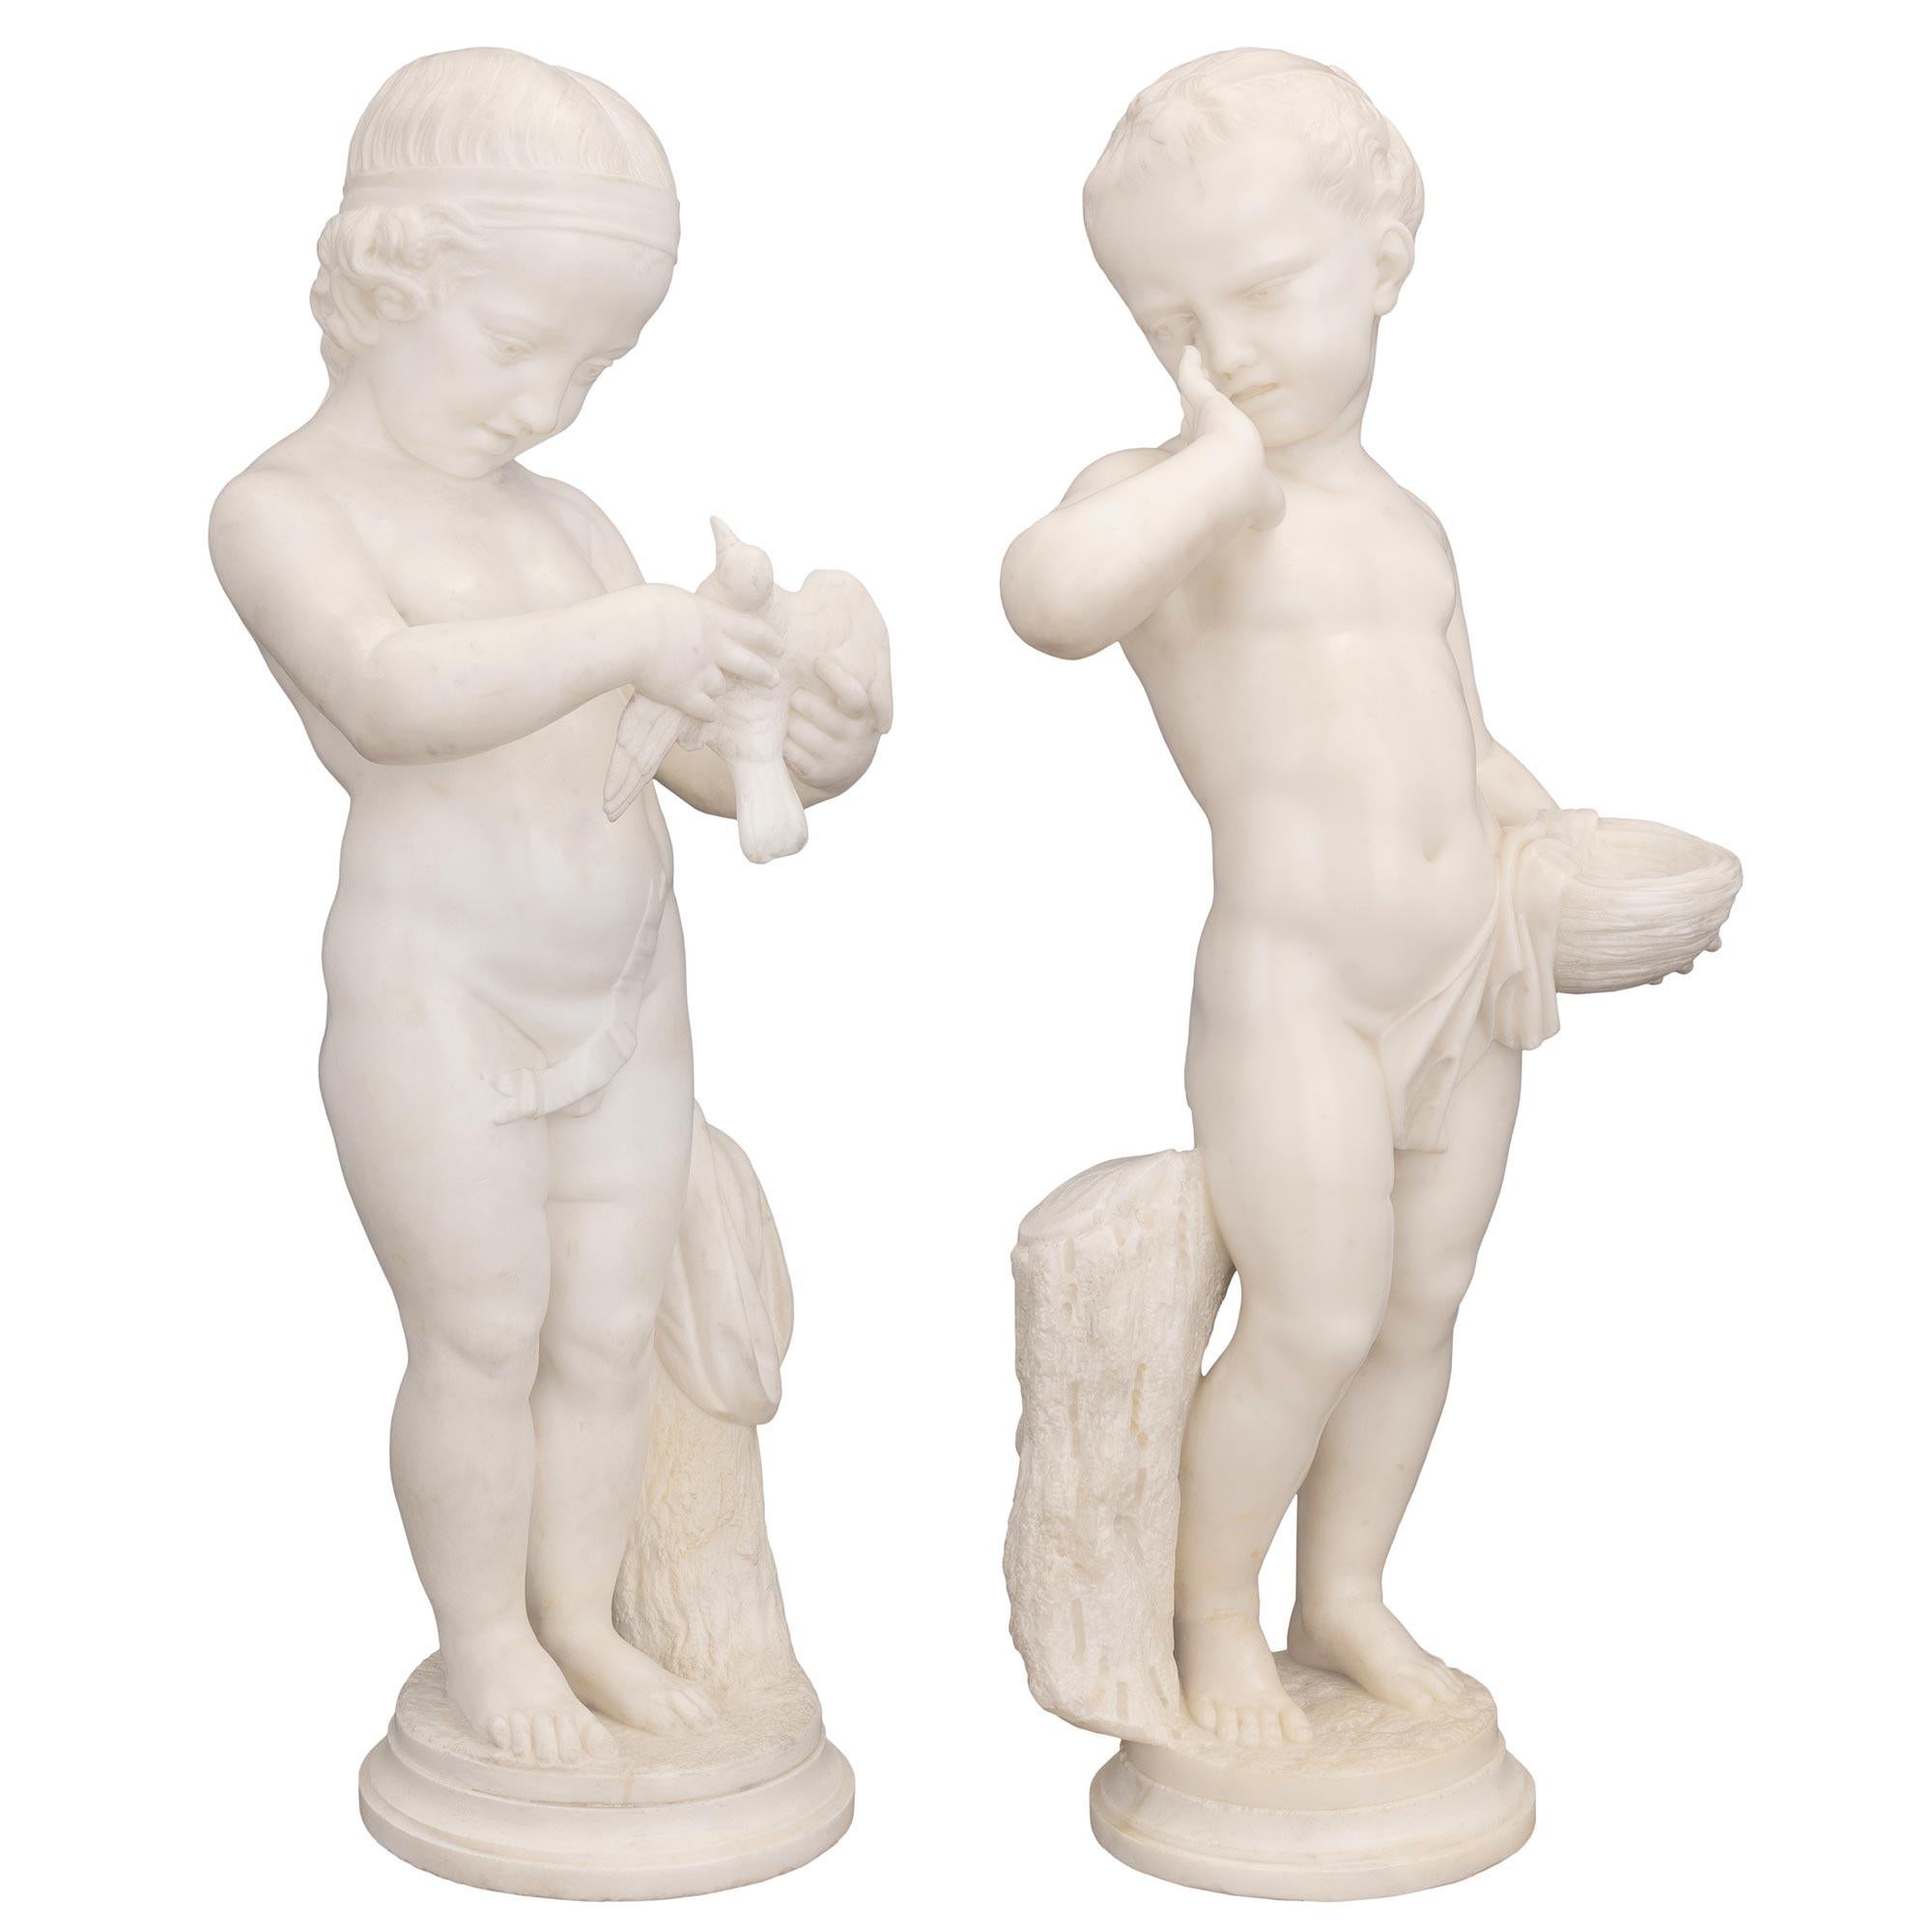 A most charming true pair of Italian 19th century white Carrara marble statues. Each statue is raised by a circular base with a fine mottled border and a wonderfully executed ground-like design. Above are the richly carved statues of a lovely young